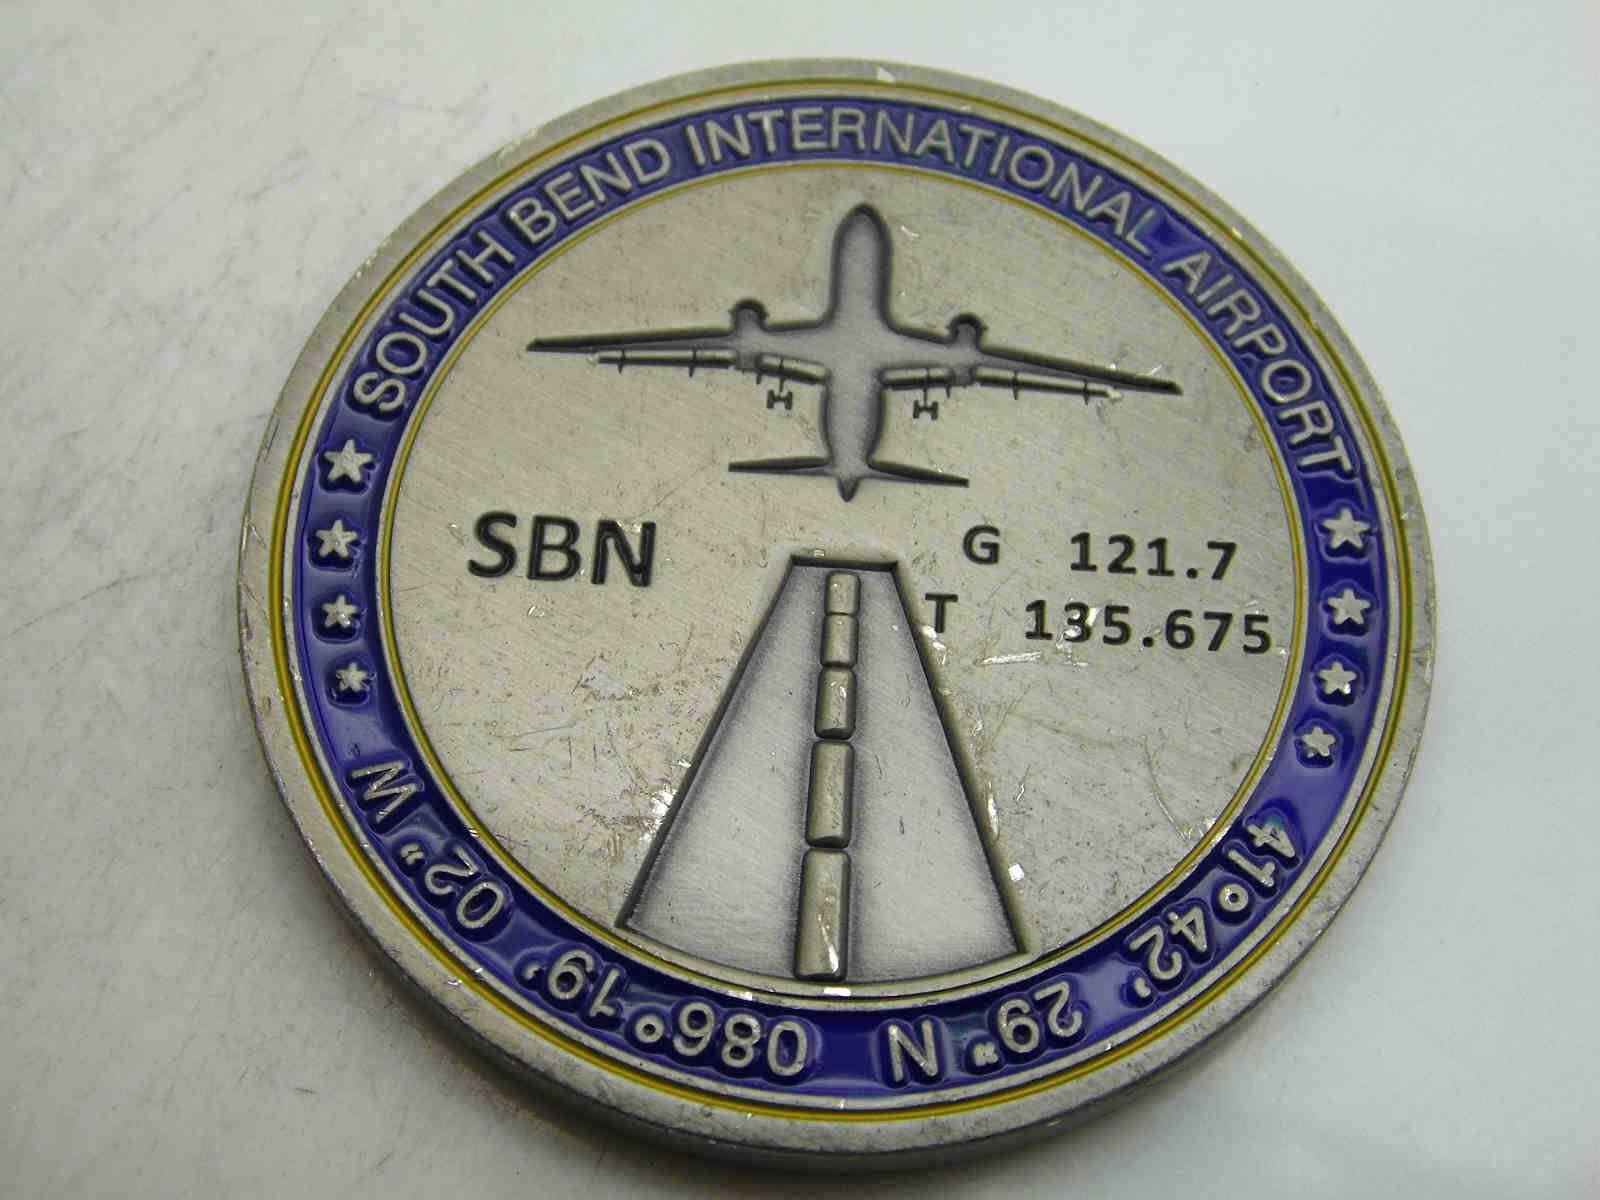 SOUTH BEND INTERNATIONAL AIRPORT CHALLENGE COIN